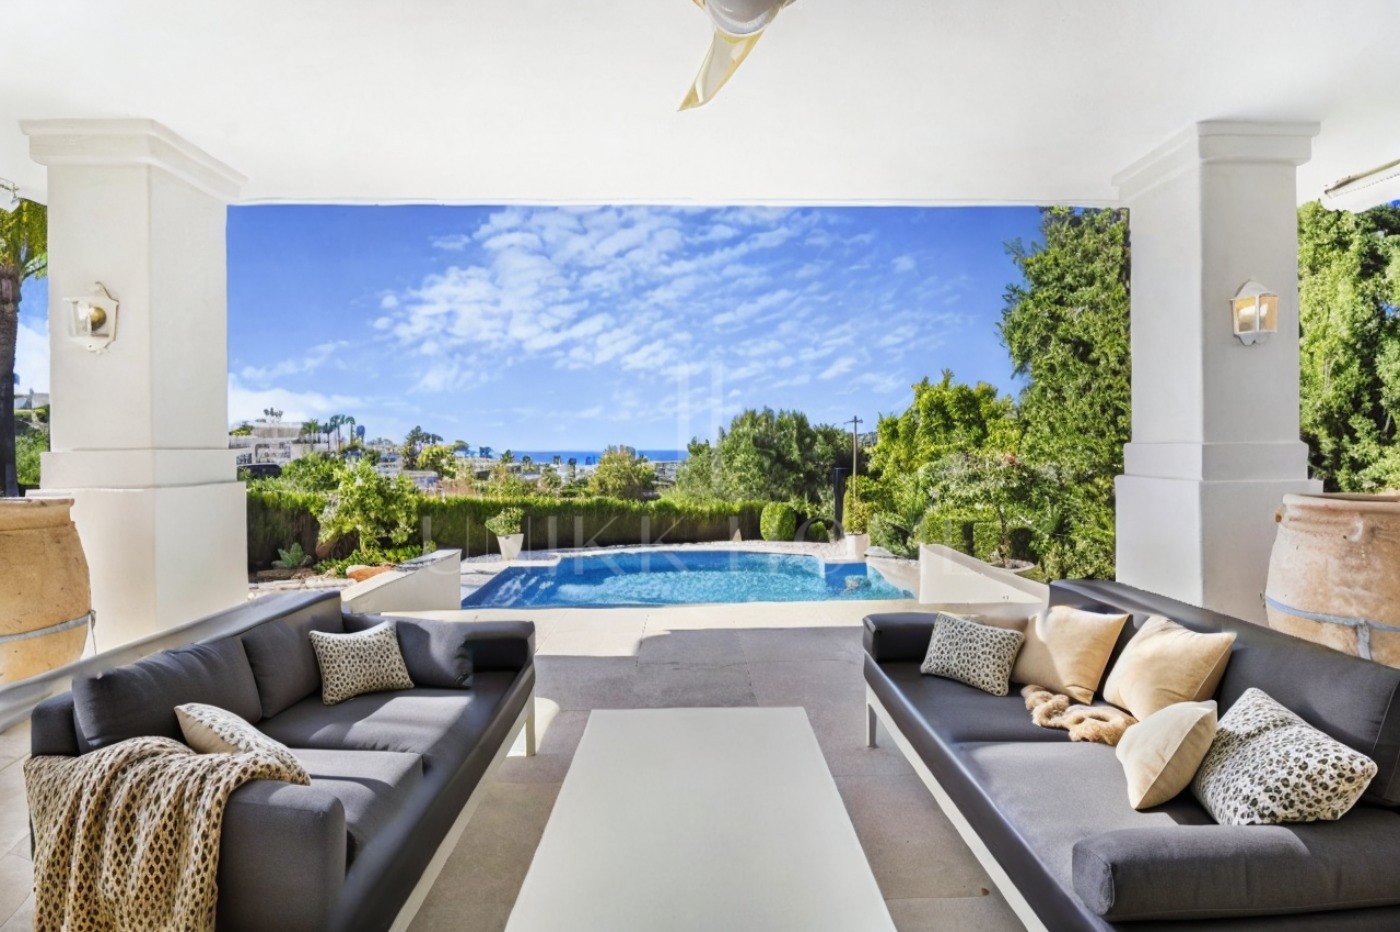 Immaculate four bedroom, south facing villa in La Quinta, Benahavis, with stunning sea views